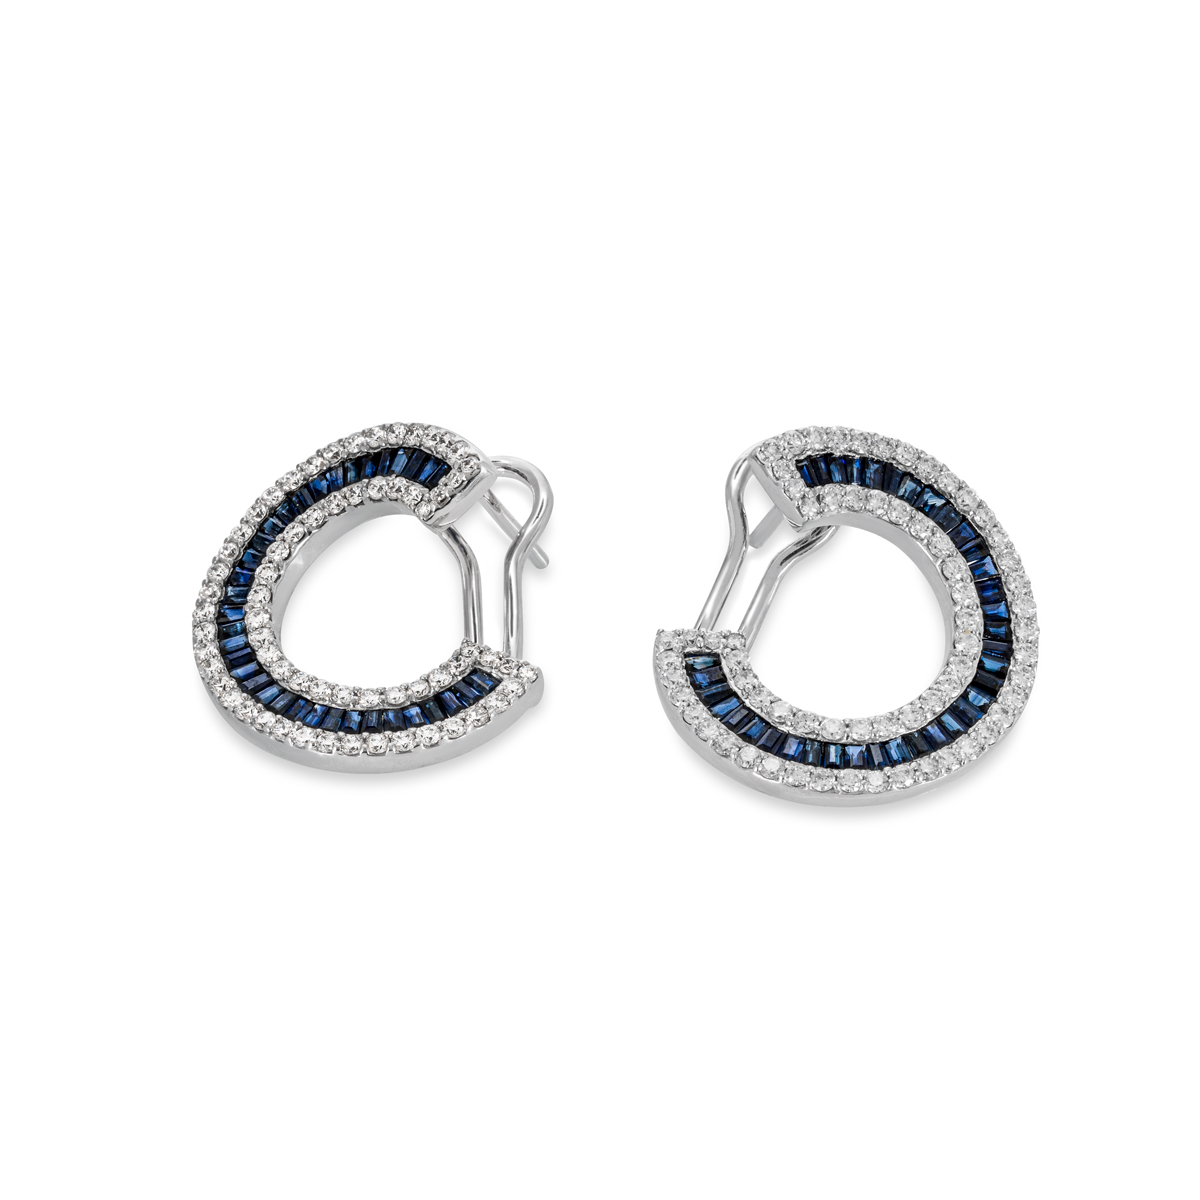 White Gold Diamond and Sapphire Earrings